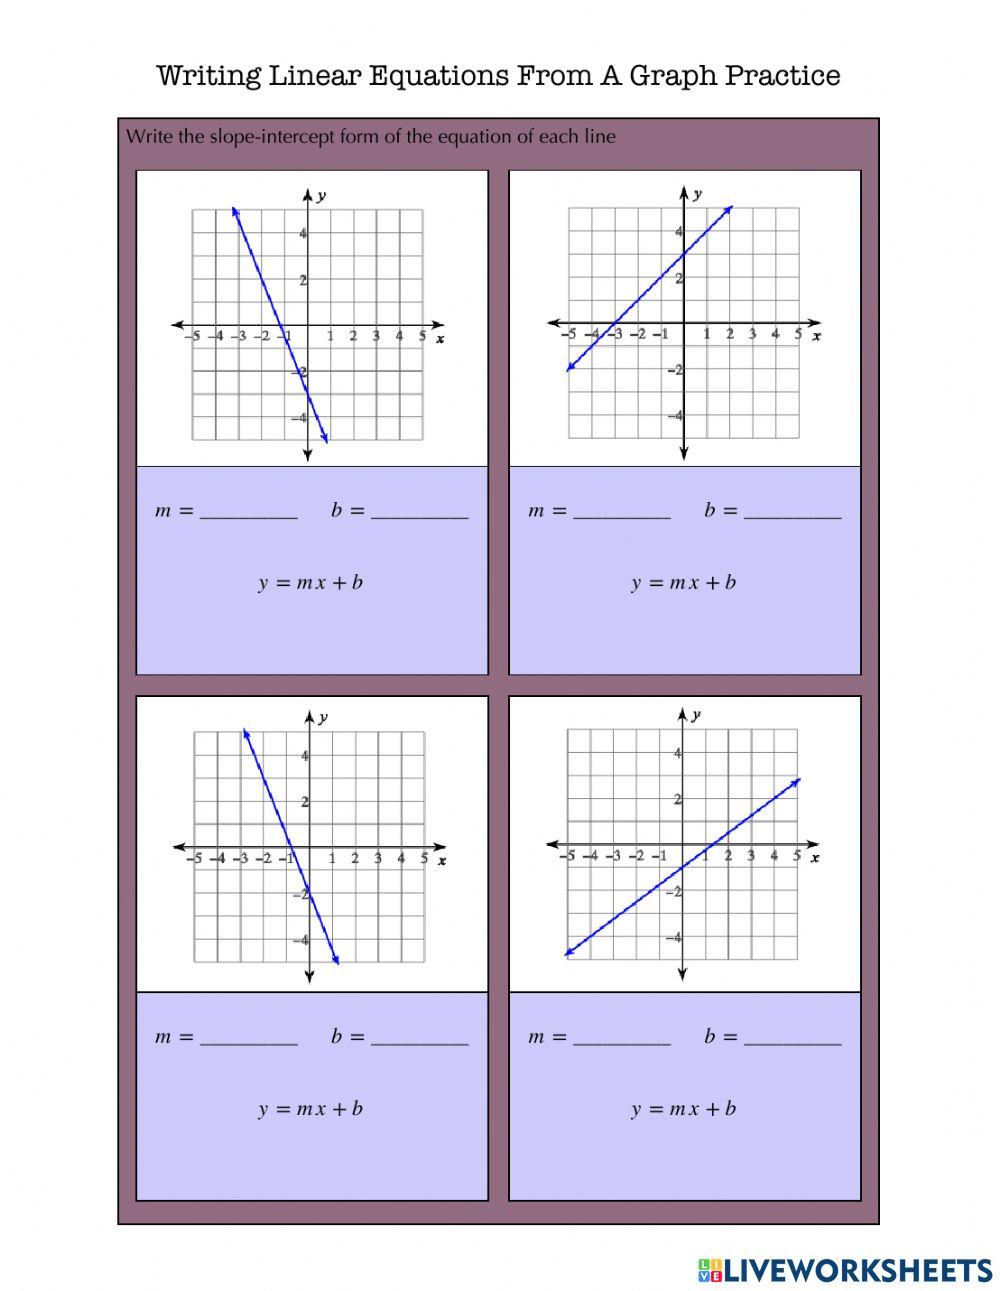 Writing Equations from a graph practice